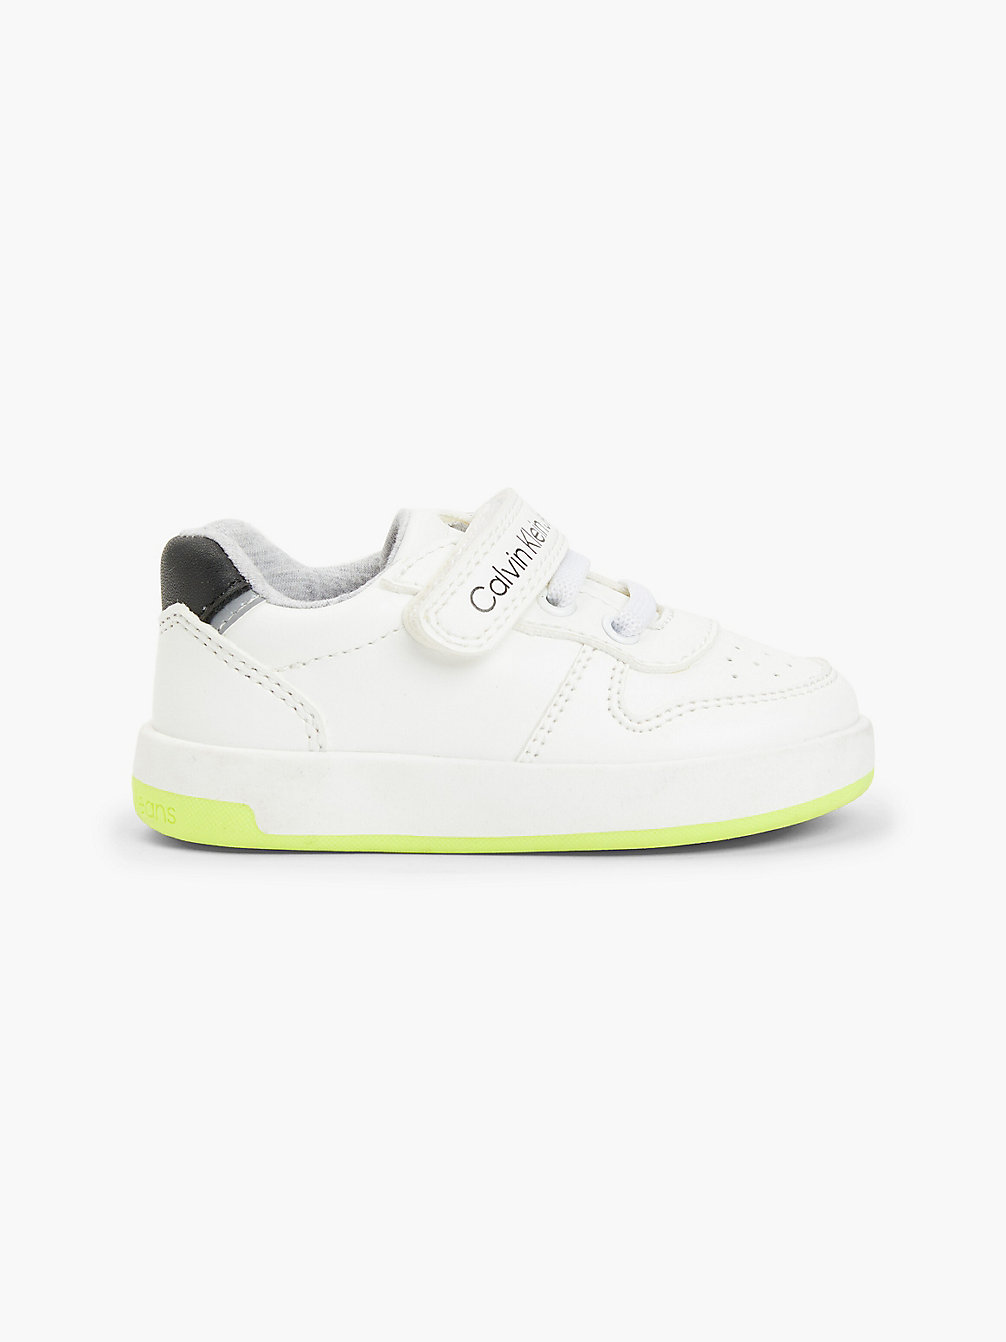 Sneakers Riciclate > WHITE/BLACK > undefined kids unisex > Calvin Klein